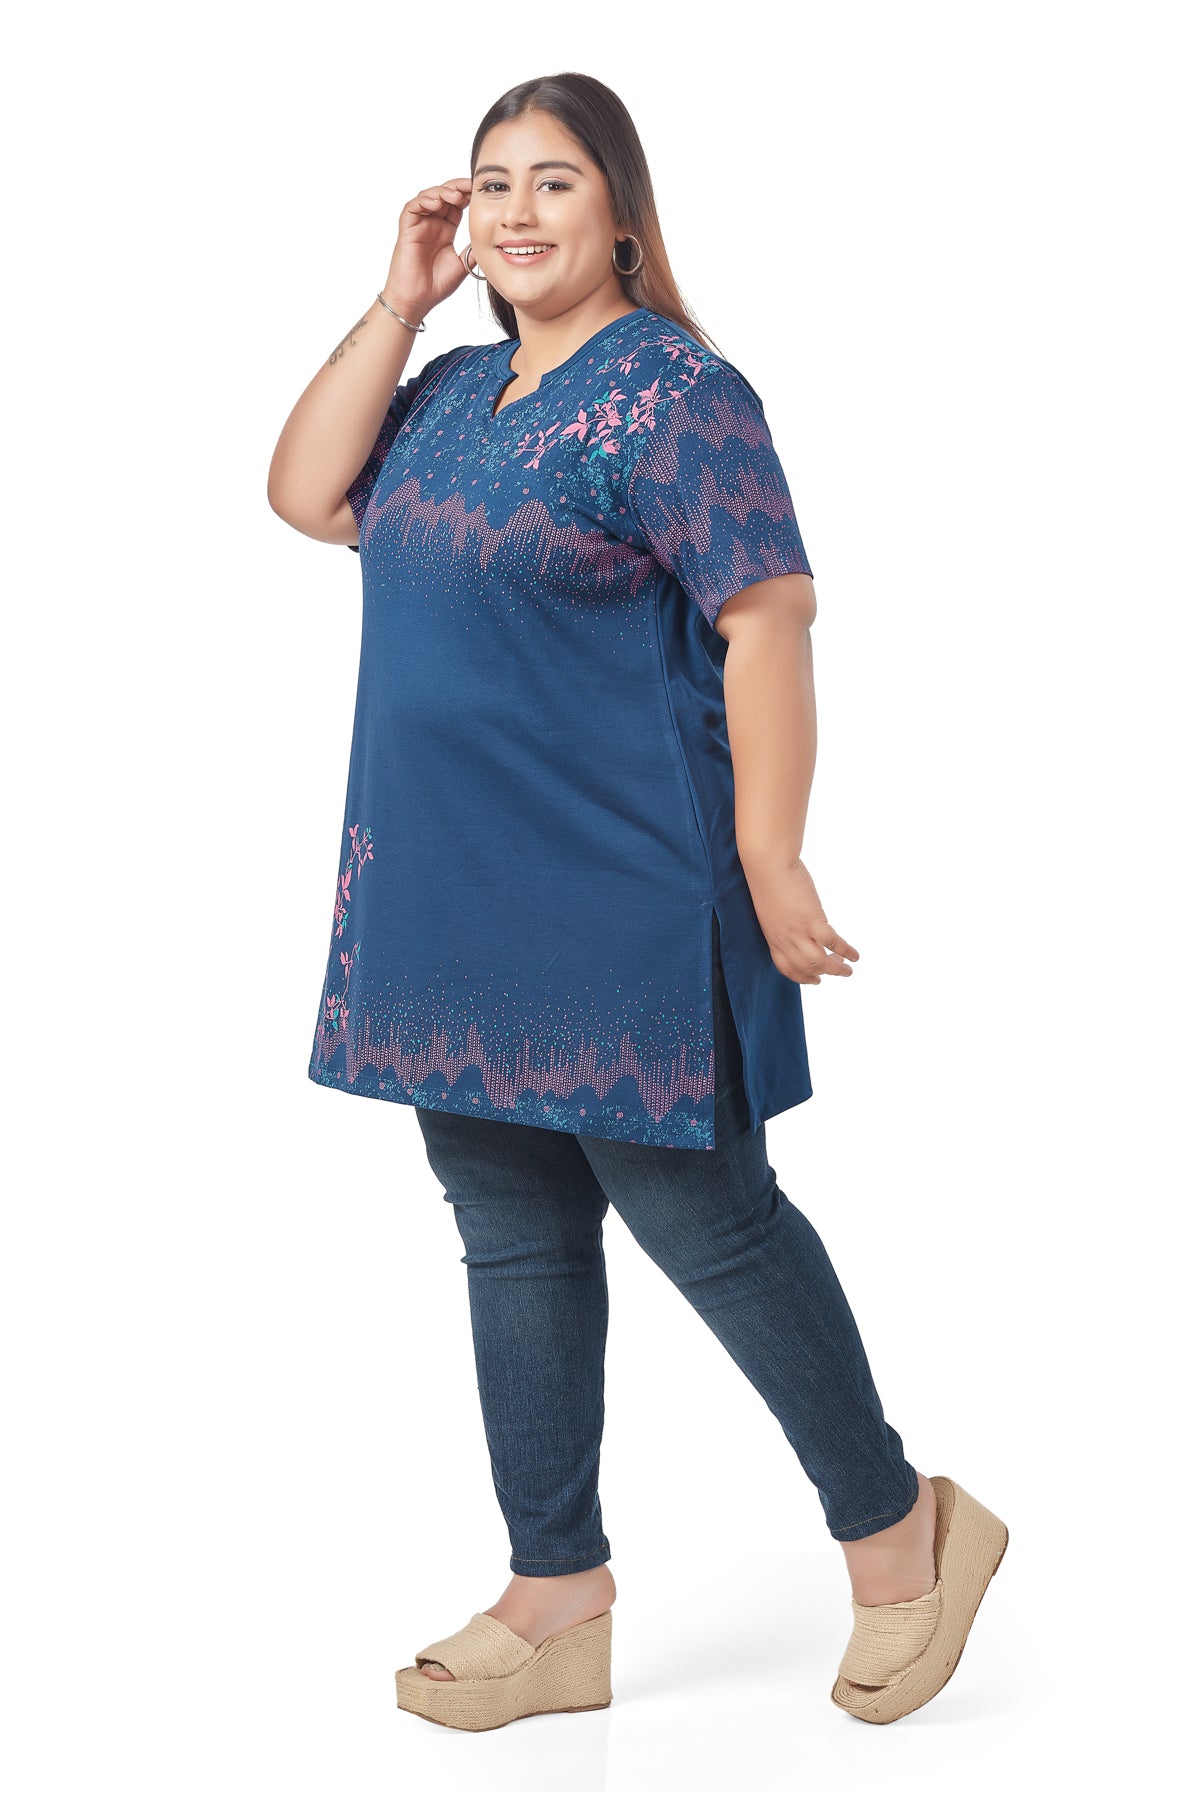 Plus Size Printed Long Tops For Women Half Sleeves - Pack of 2 (Pink & Blue)